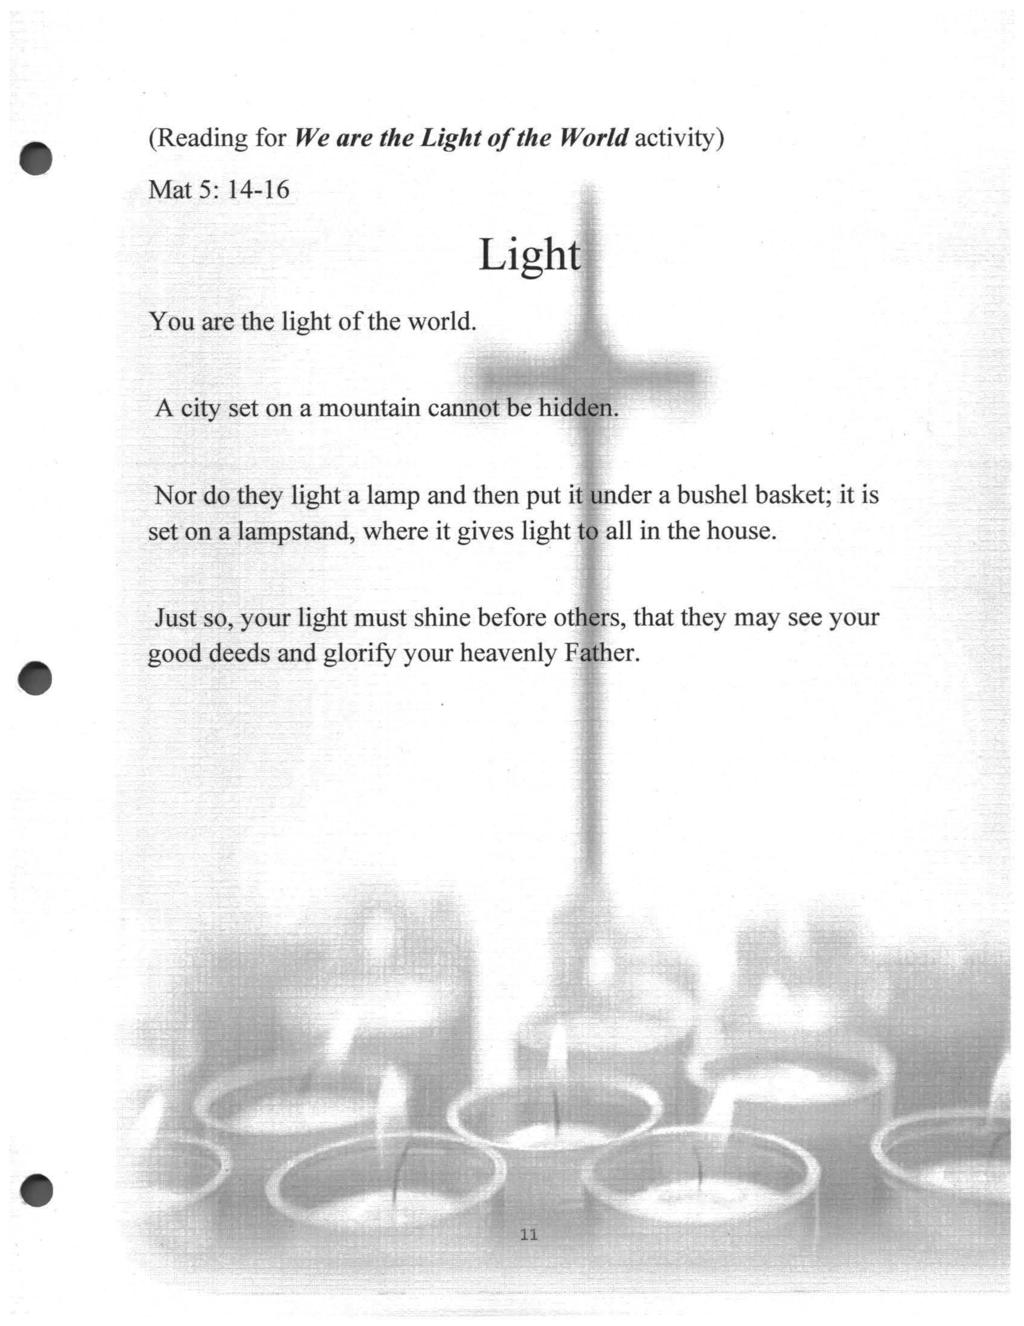 (Reading for We are the Light of the World activity) Mat 5: 14-16 Light You are the light of the world. A city set on a mountain cannot be hidden.